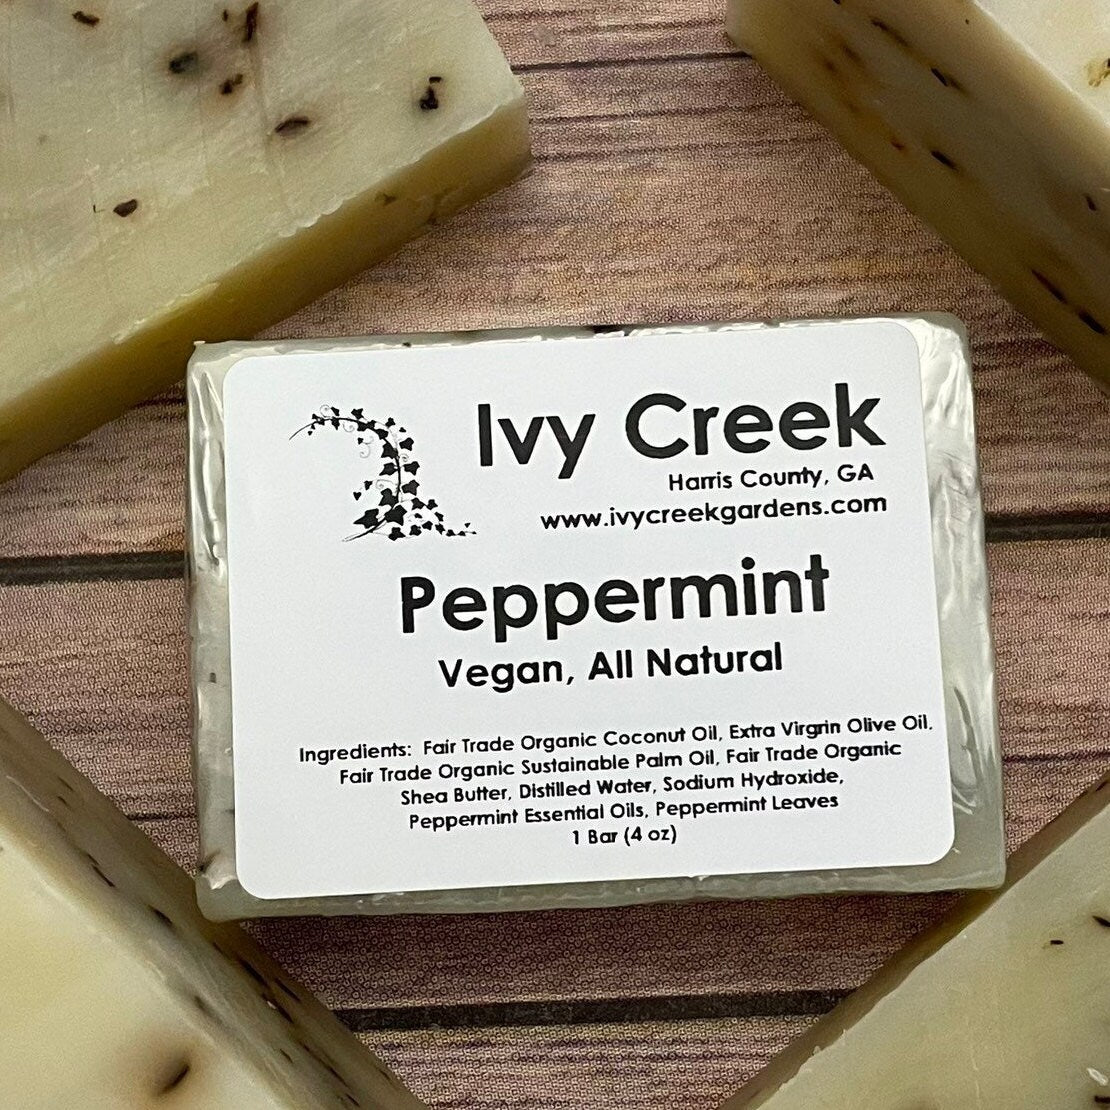 Ivy Creek Peppermint Vegan Soap | Natural, Holistic Soap for Her | Refreshing and Invigorating | Gifts for Mom | Fair Trade | 4 oz